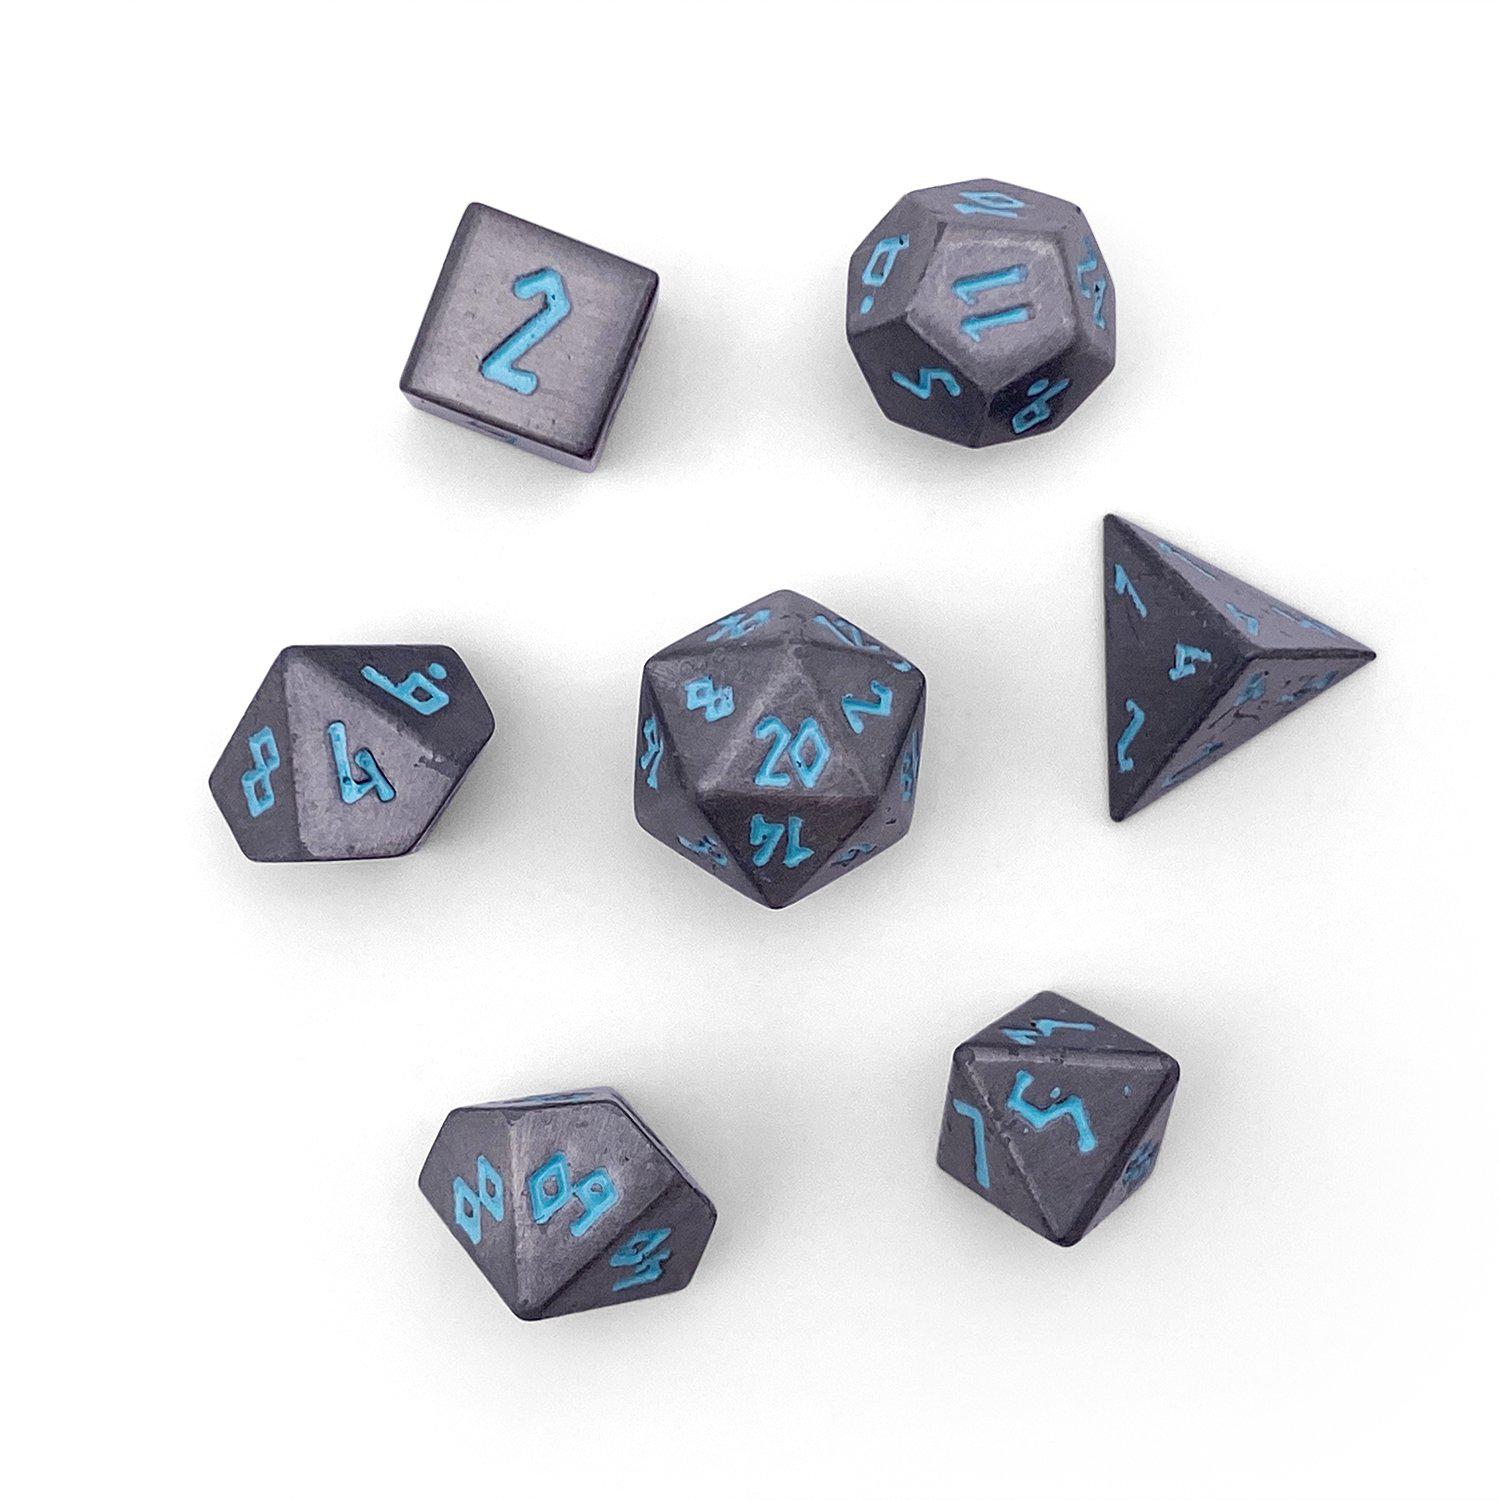 Spellbound Pebble™ Dice - 10mm Alloy Mini Polyhedral Dice Set